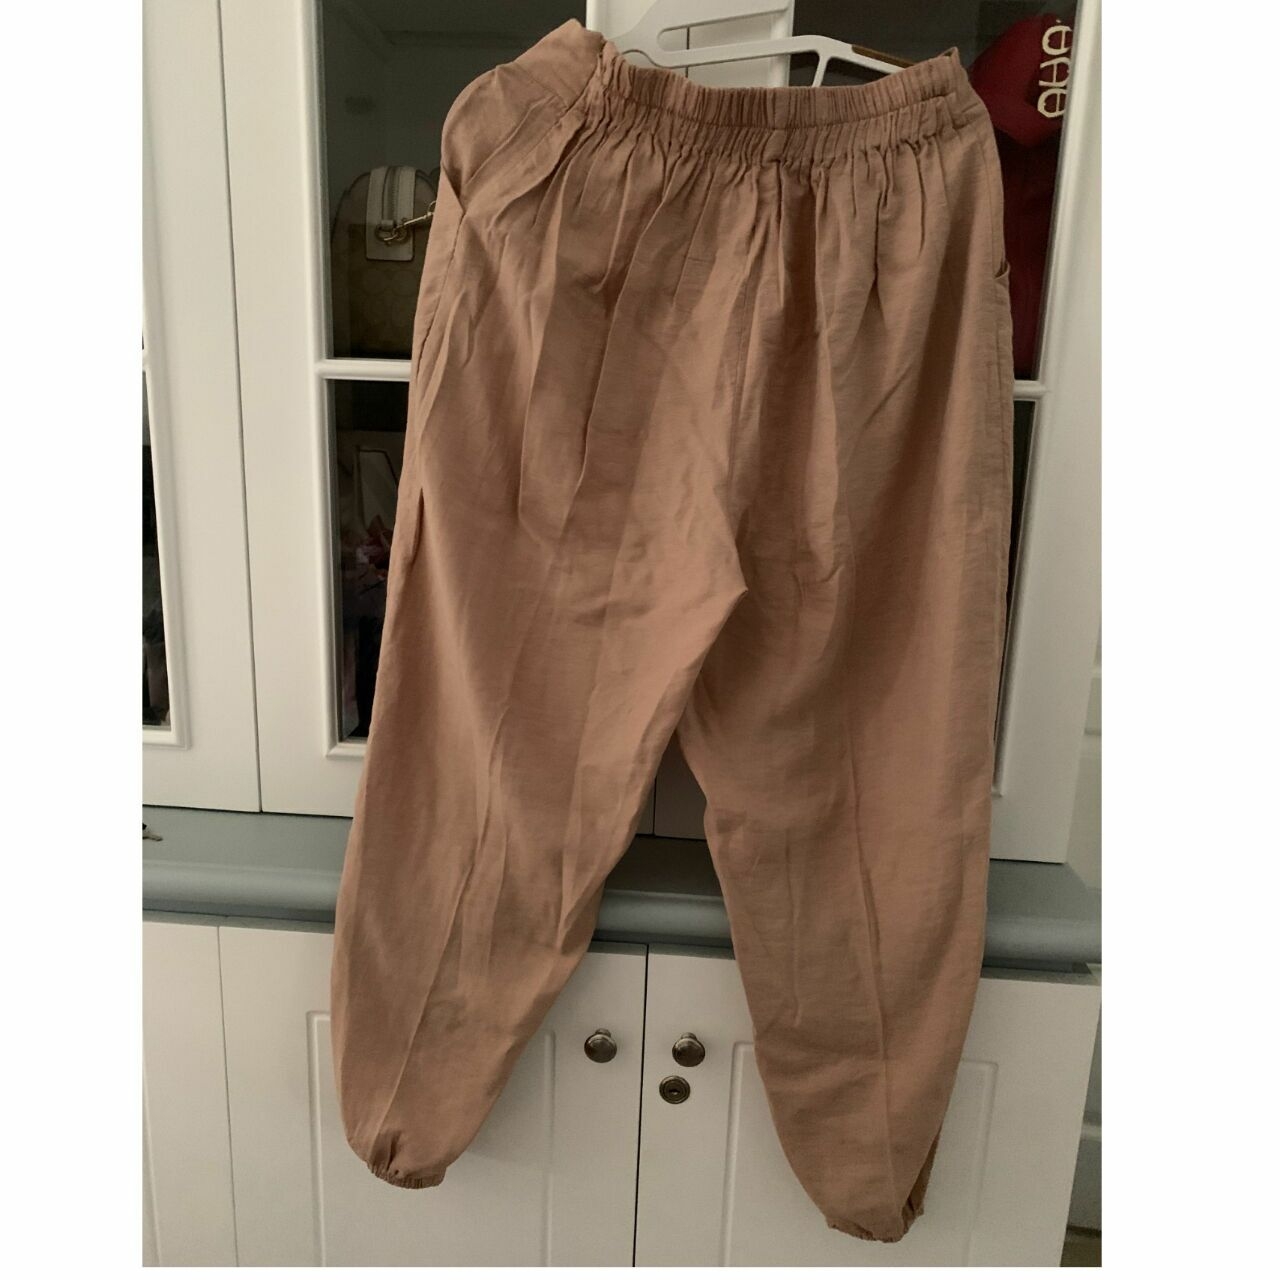 Chic Simple Nude Long Pants